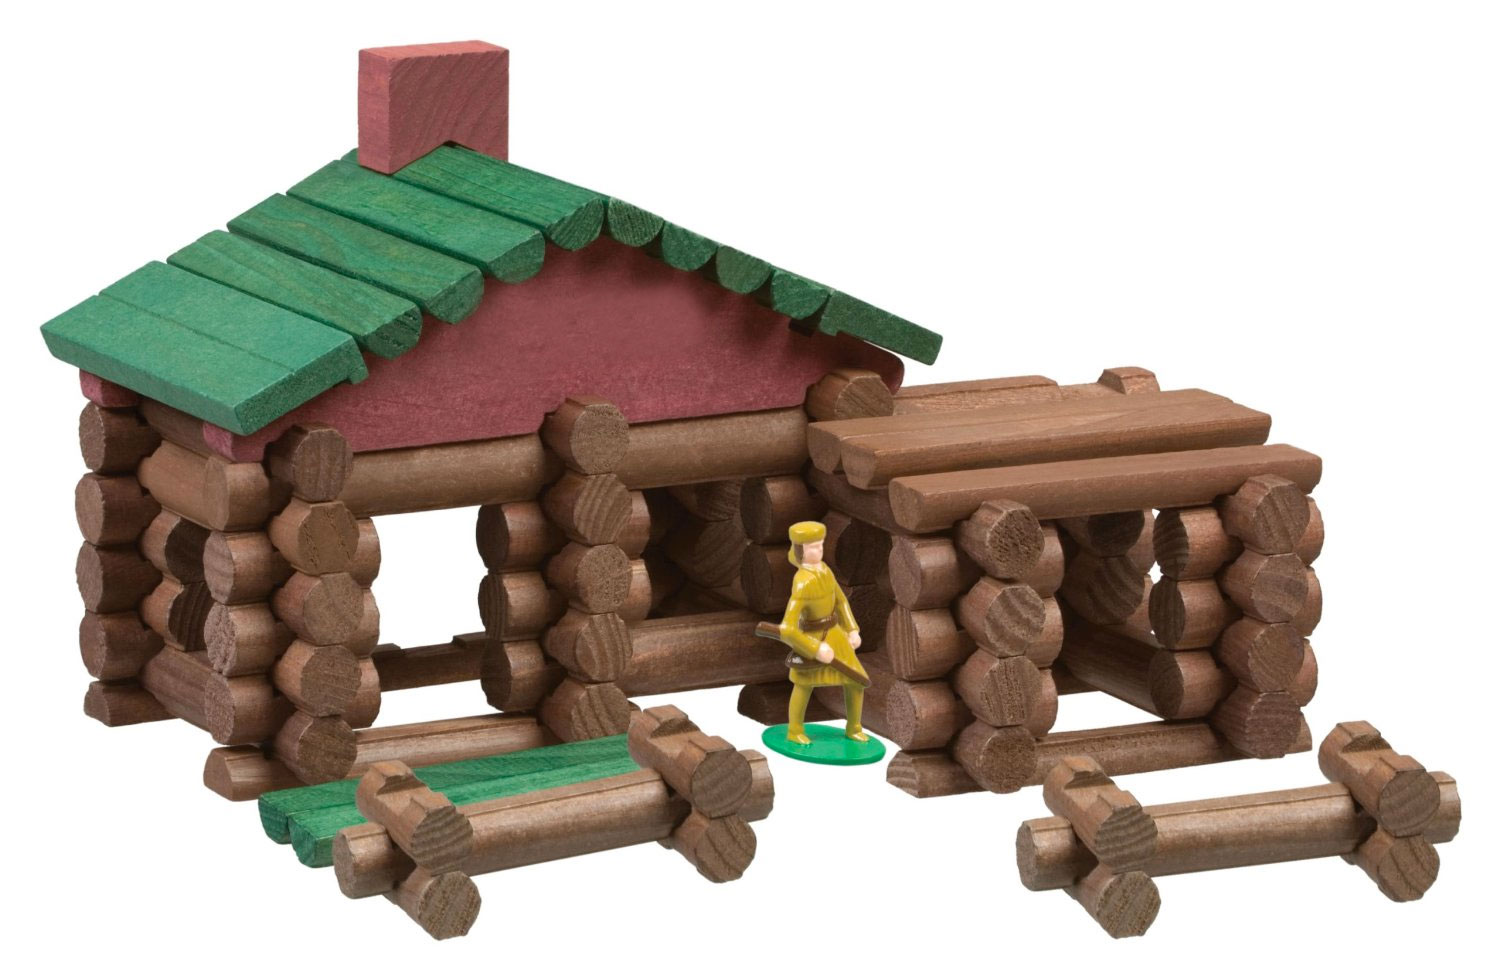 Retro Toys Quiz 🎲: Can You Identify These 1960s Toys? Lincoln Logs